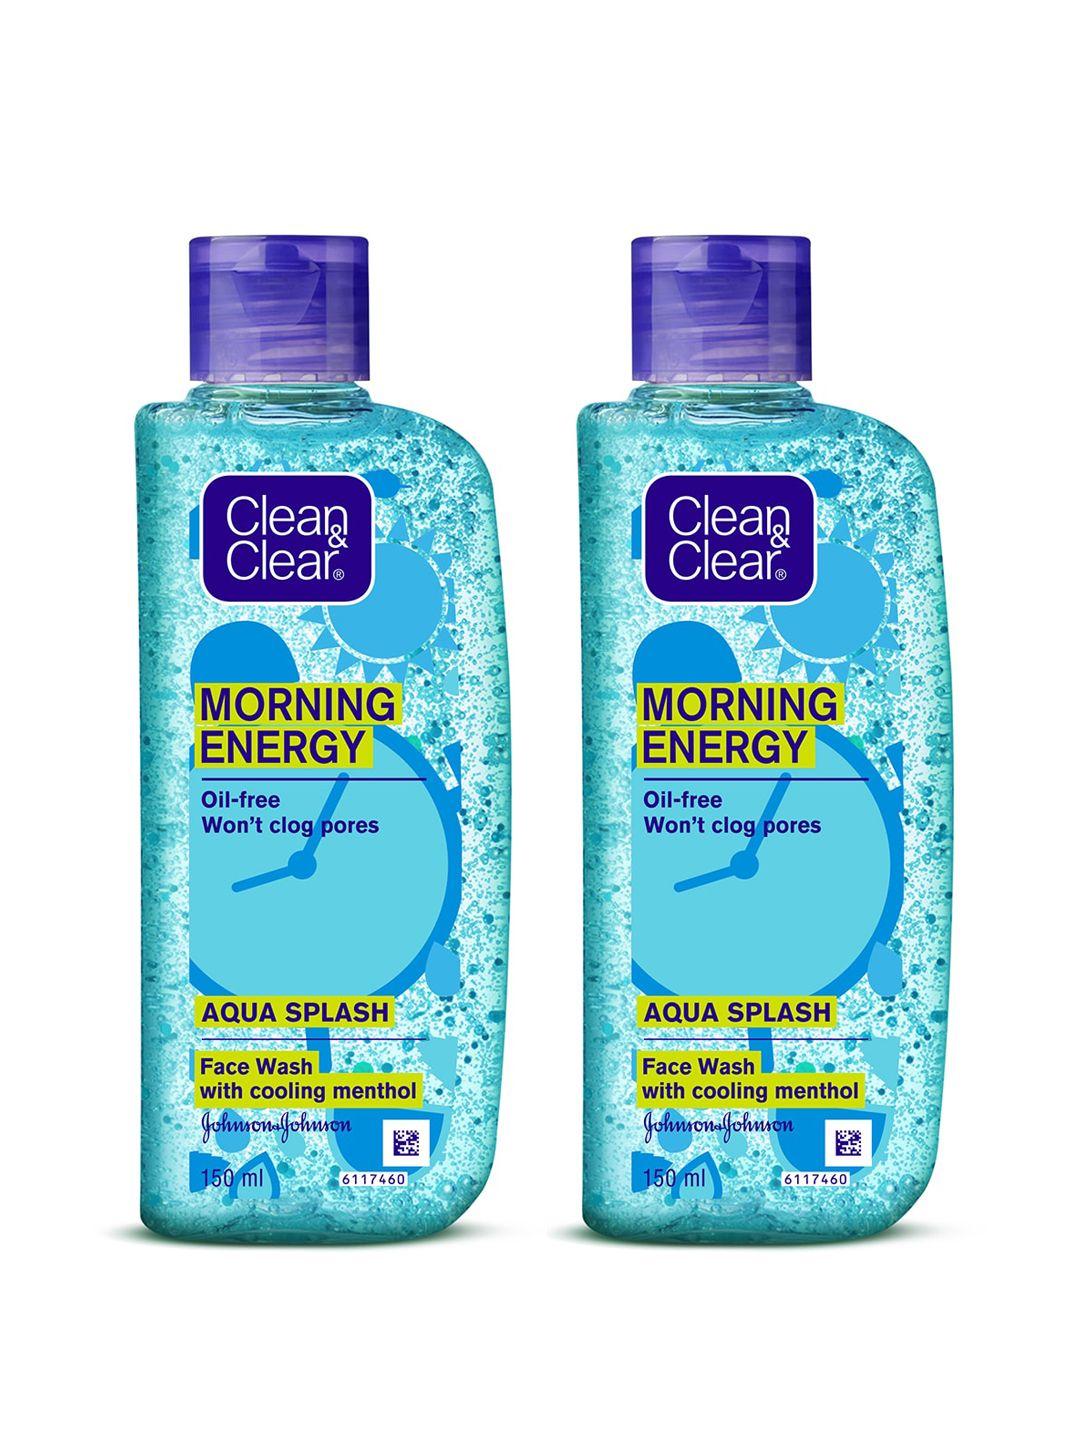 clean&clear-set-of-2-morning-energy-aqua-splash-face-wash-with-cooling-menthol-150-ml-each